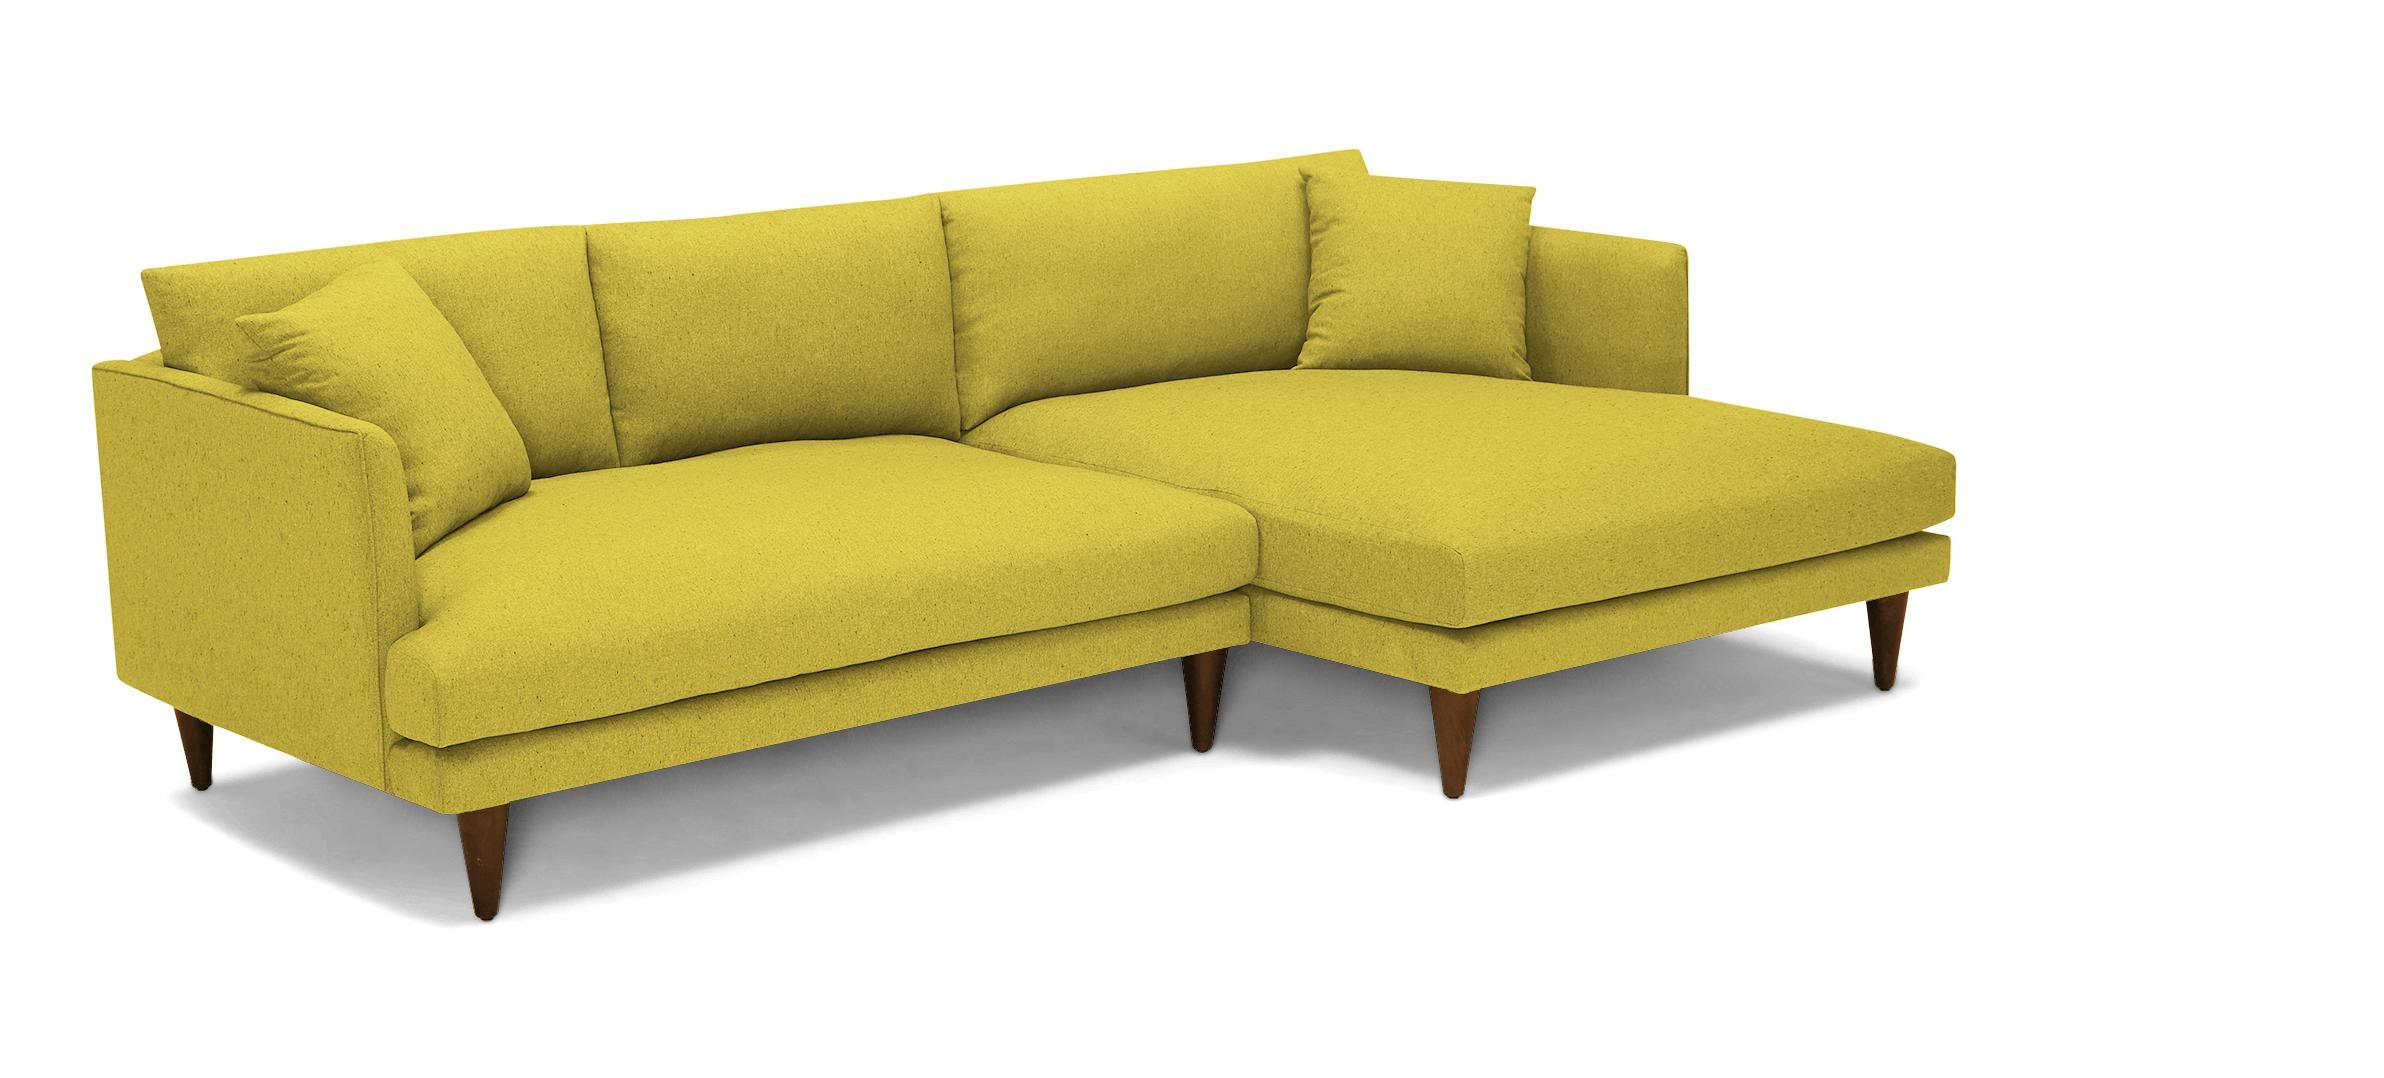 Yellow Lewis Mid Century Modern Sectional - Bloke Goldenrod - Mocha - Right - Cone - Image 1